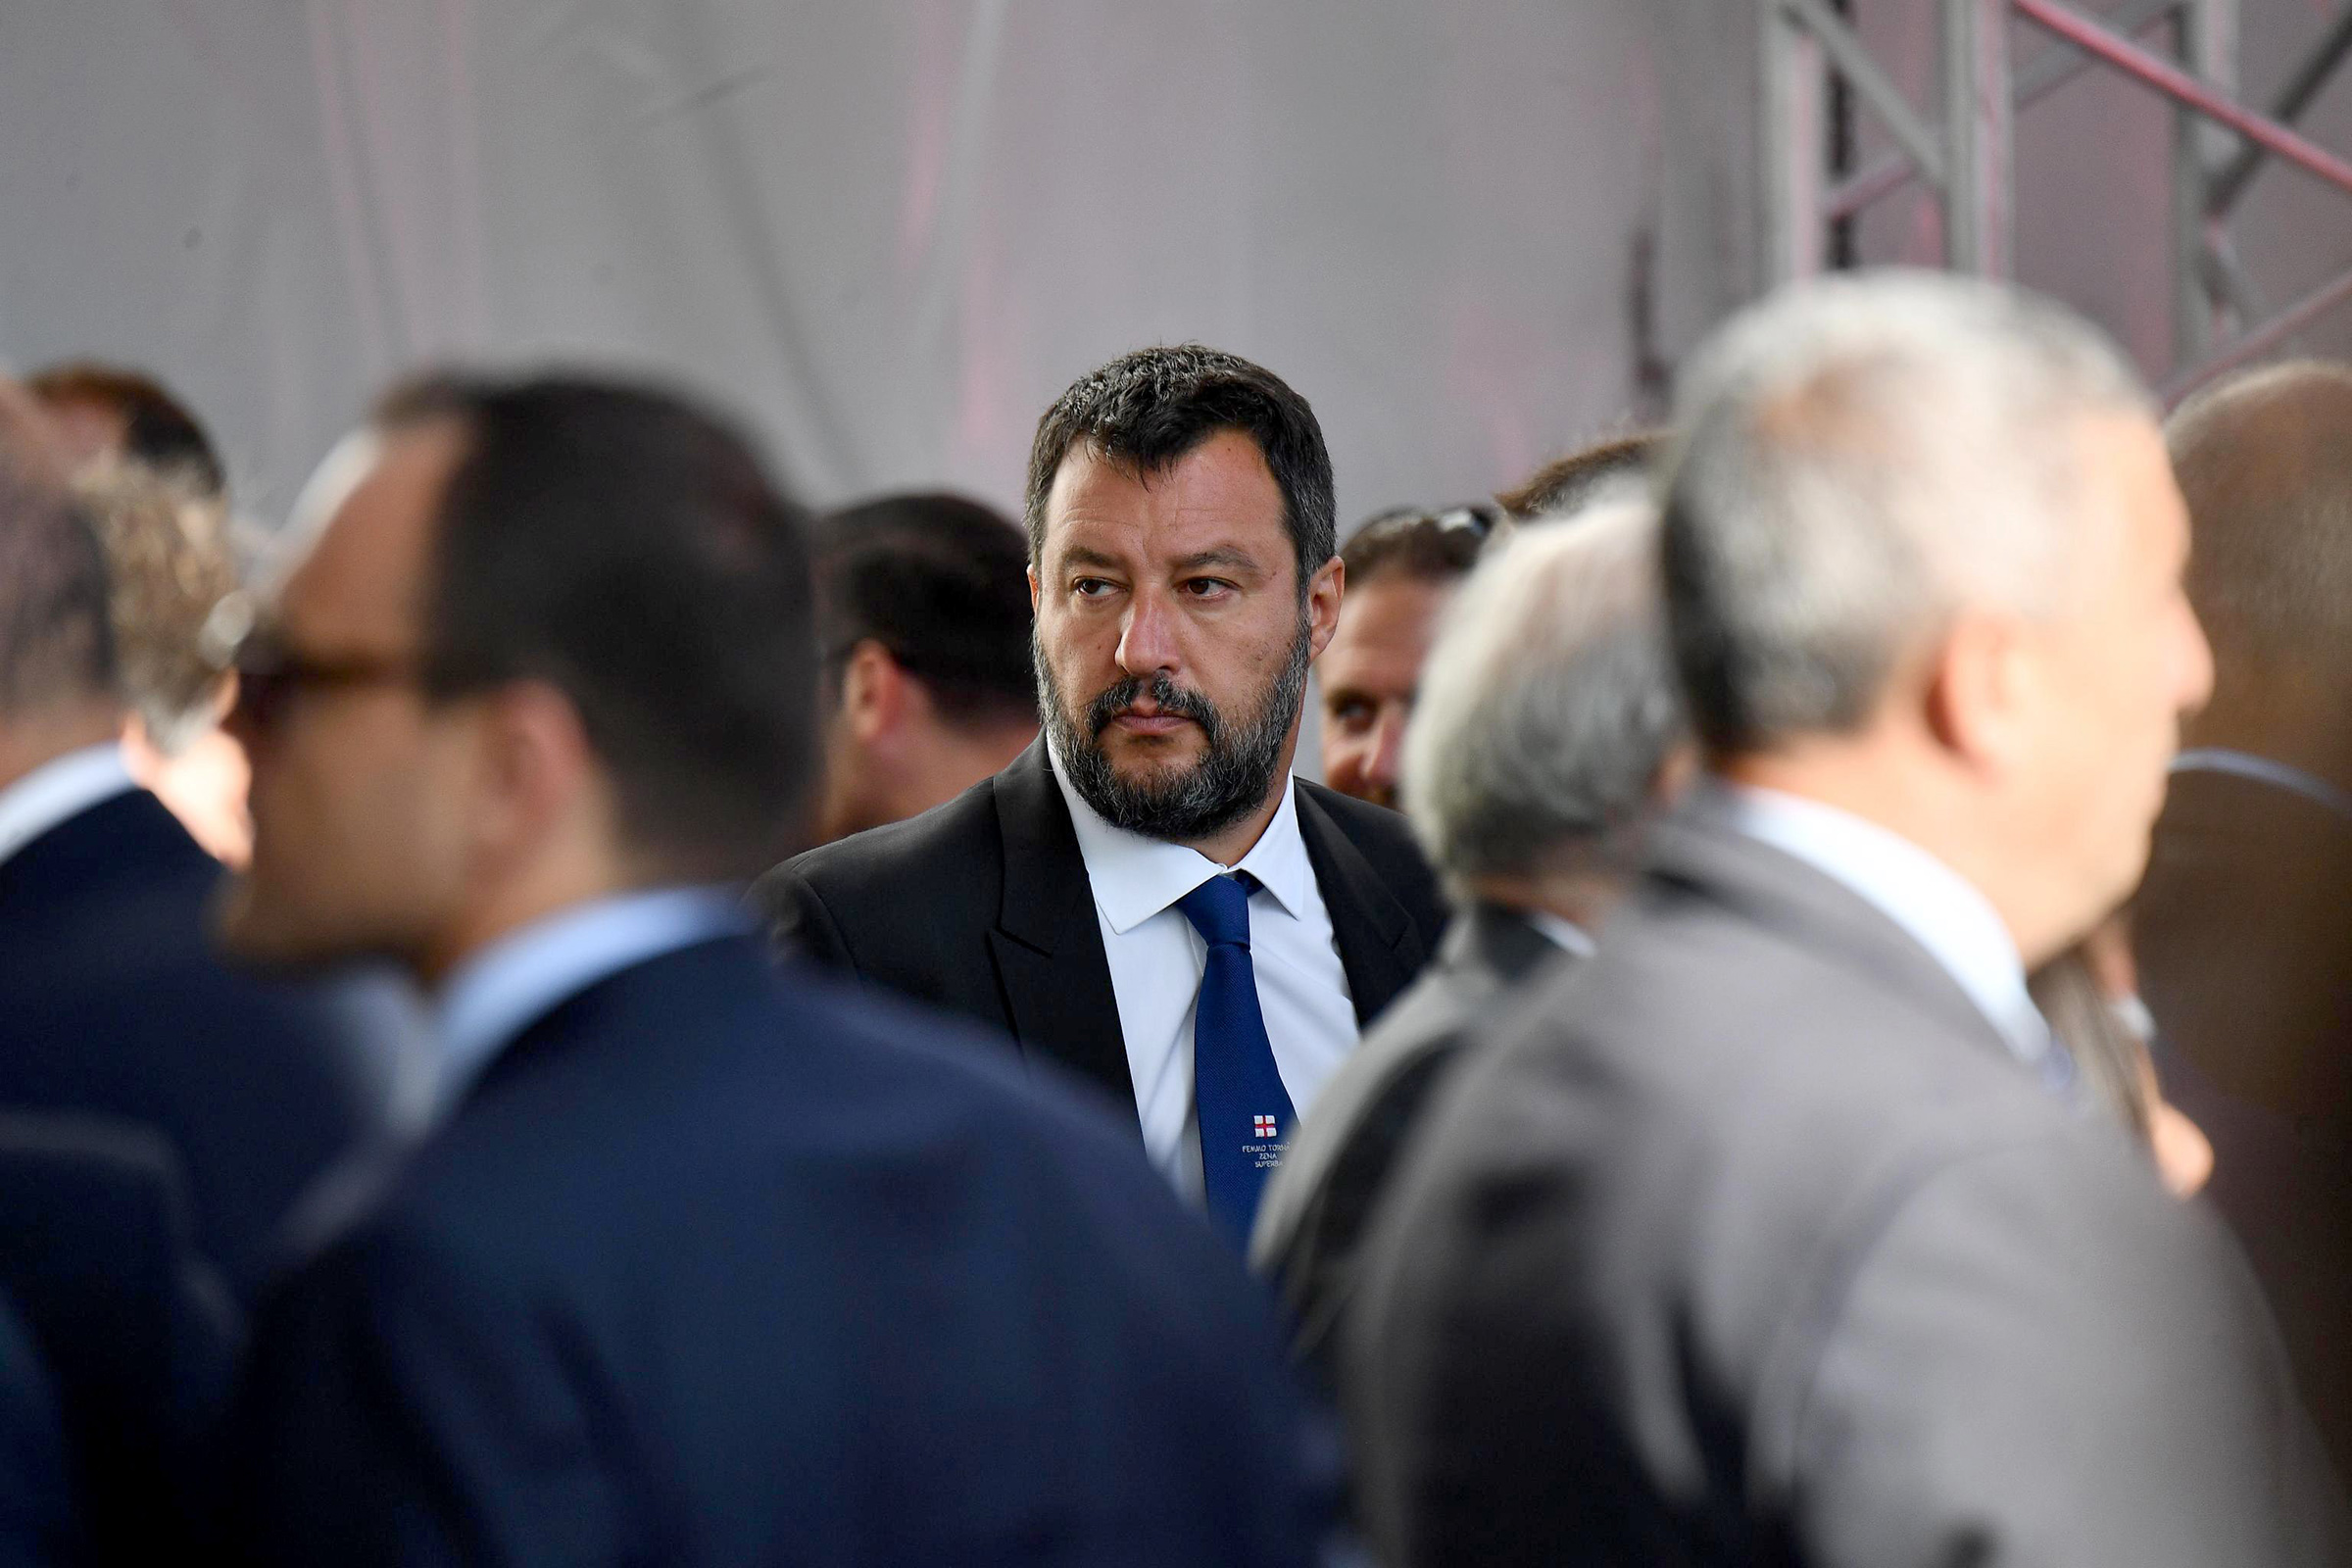 Italian Deputy Premier and Interior Minister Matteo Salvini arrives to attend a memorial ceremony for the victims on the first anniversary of the Morandi highway bridge collapse, in Genoa on August 14. (Luca Zennaro/EPA-EFE/Shutterstock)